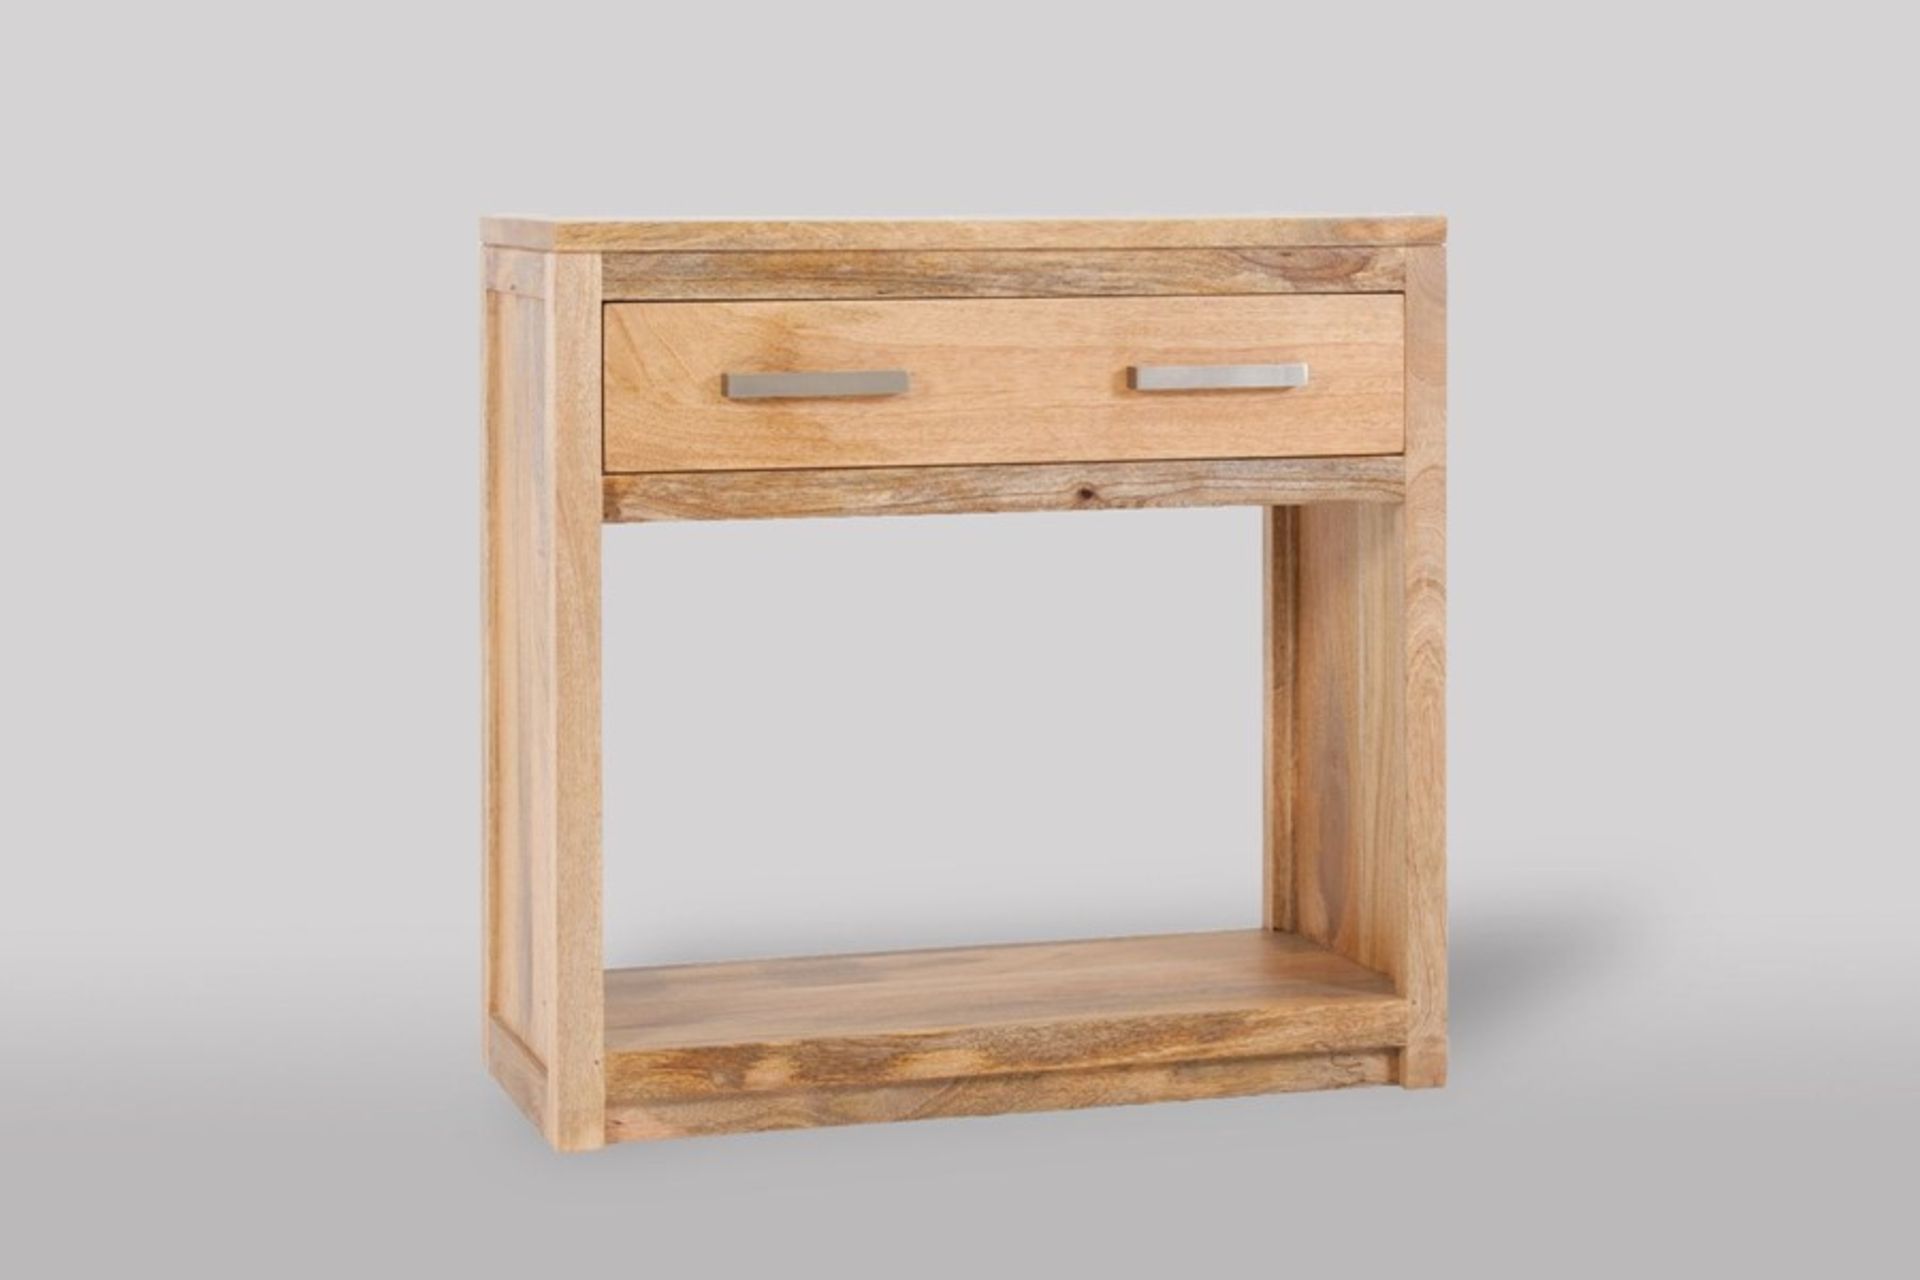 1 GRADE A BOXED BH BOSS MANGO WOOD CONSOLE TABLE FULLY ASSEMBLED SOLID WOOD / RRP £240.00